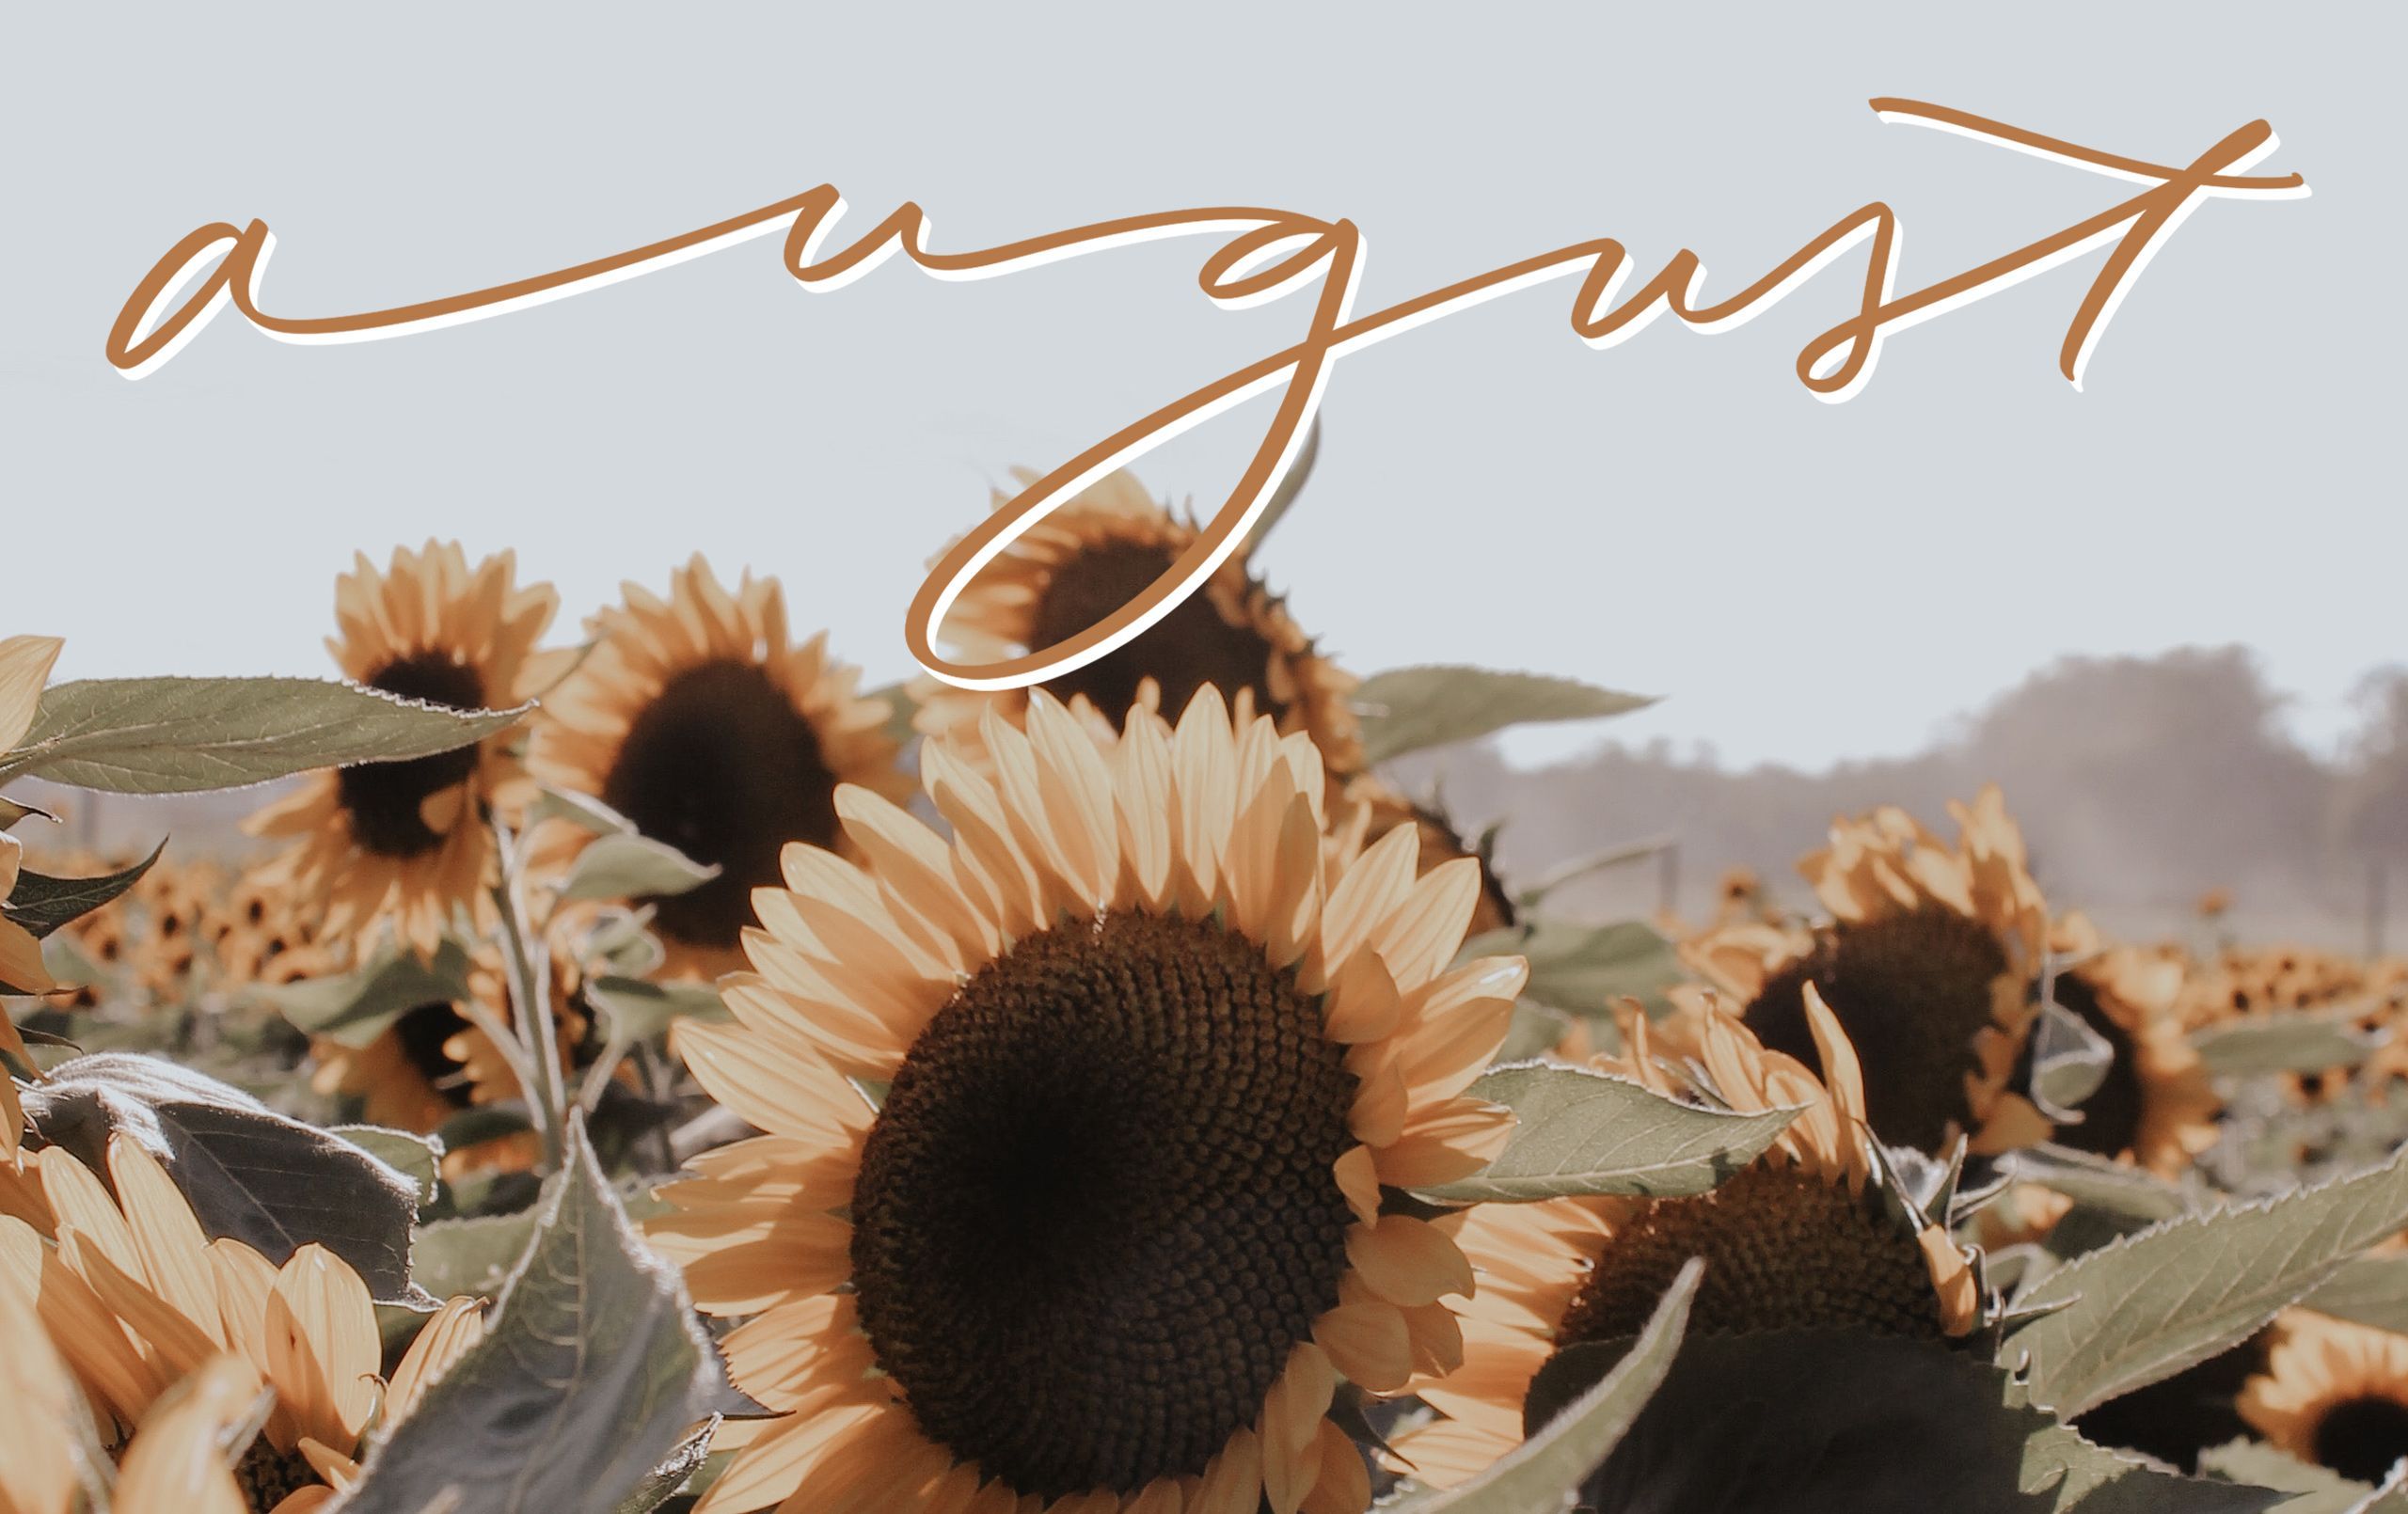 The word august is written in a field of sunflowers - August